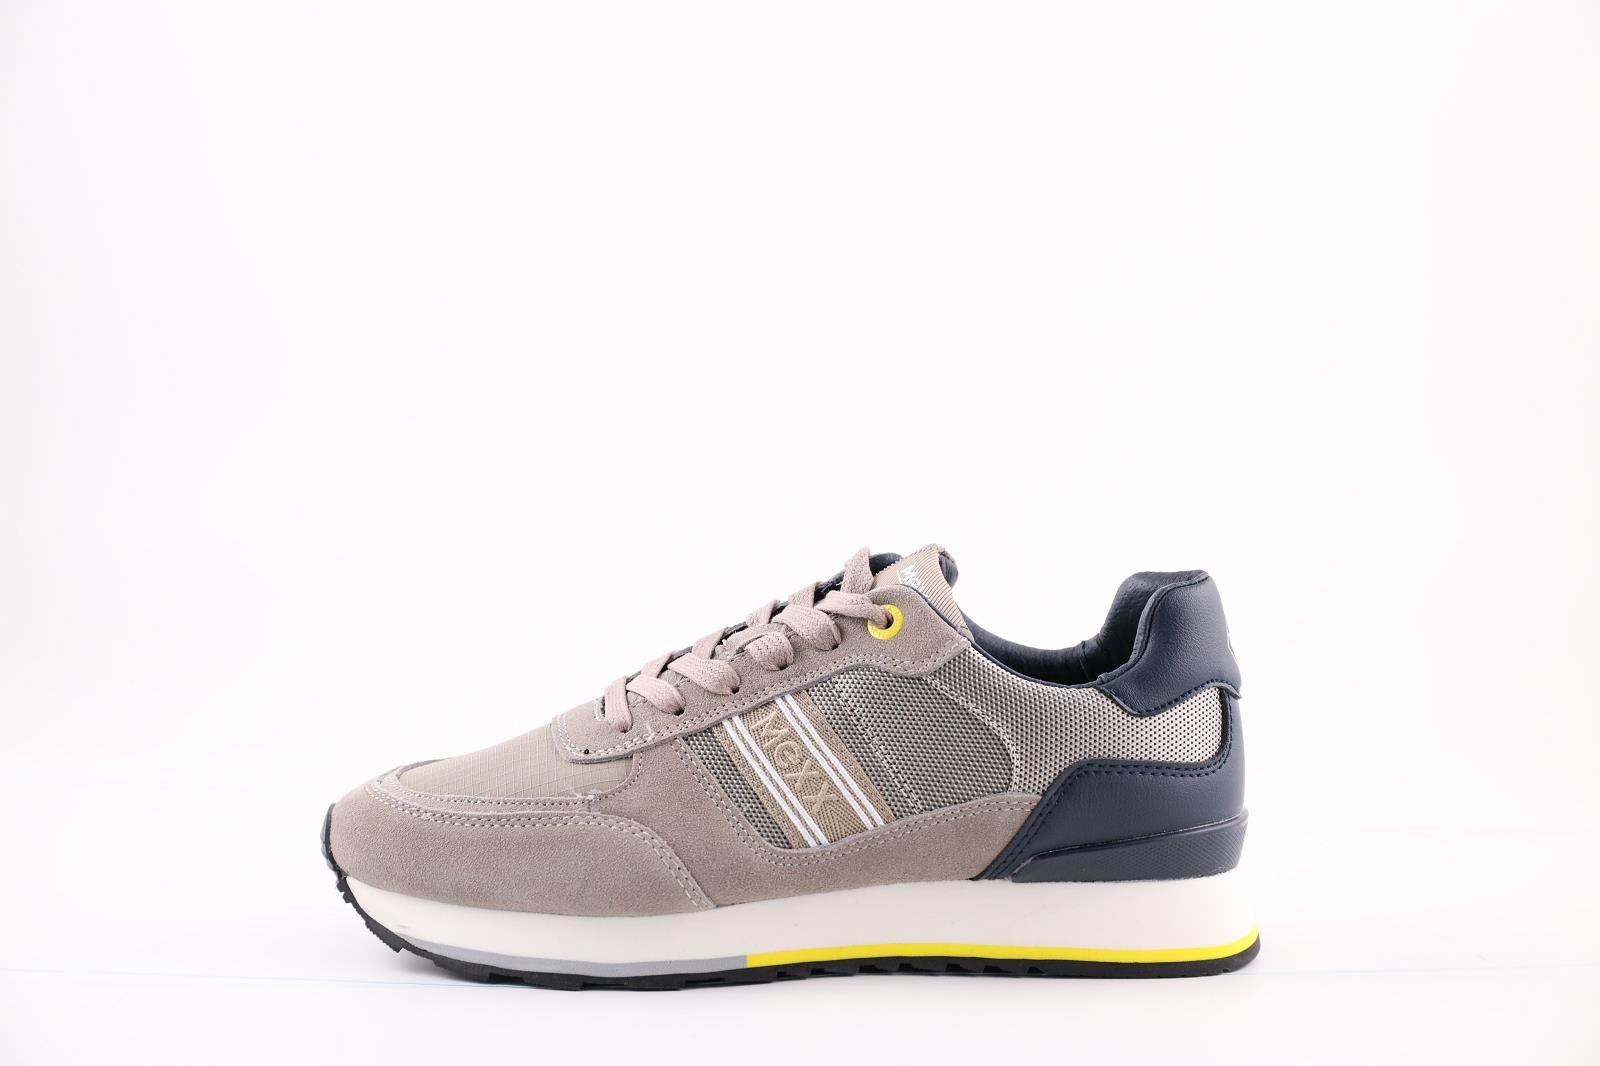 Mexx Sneackers Taupe hommes (Hoover - MXWM000301) - Marques à Suivre